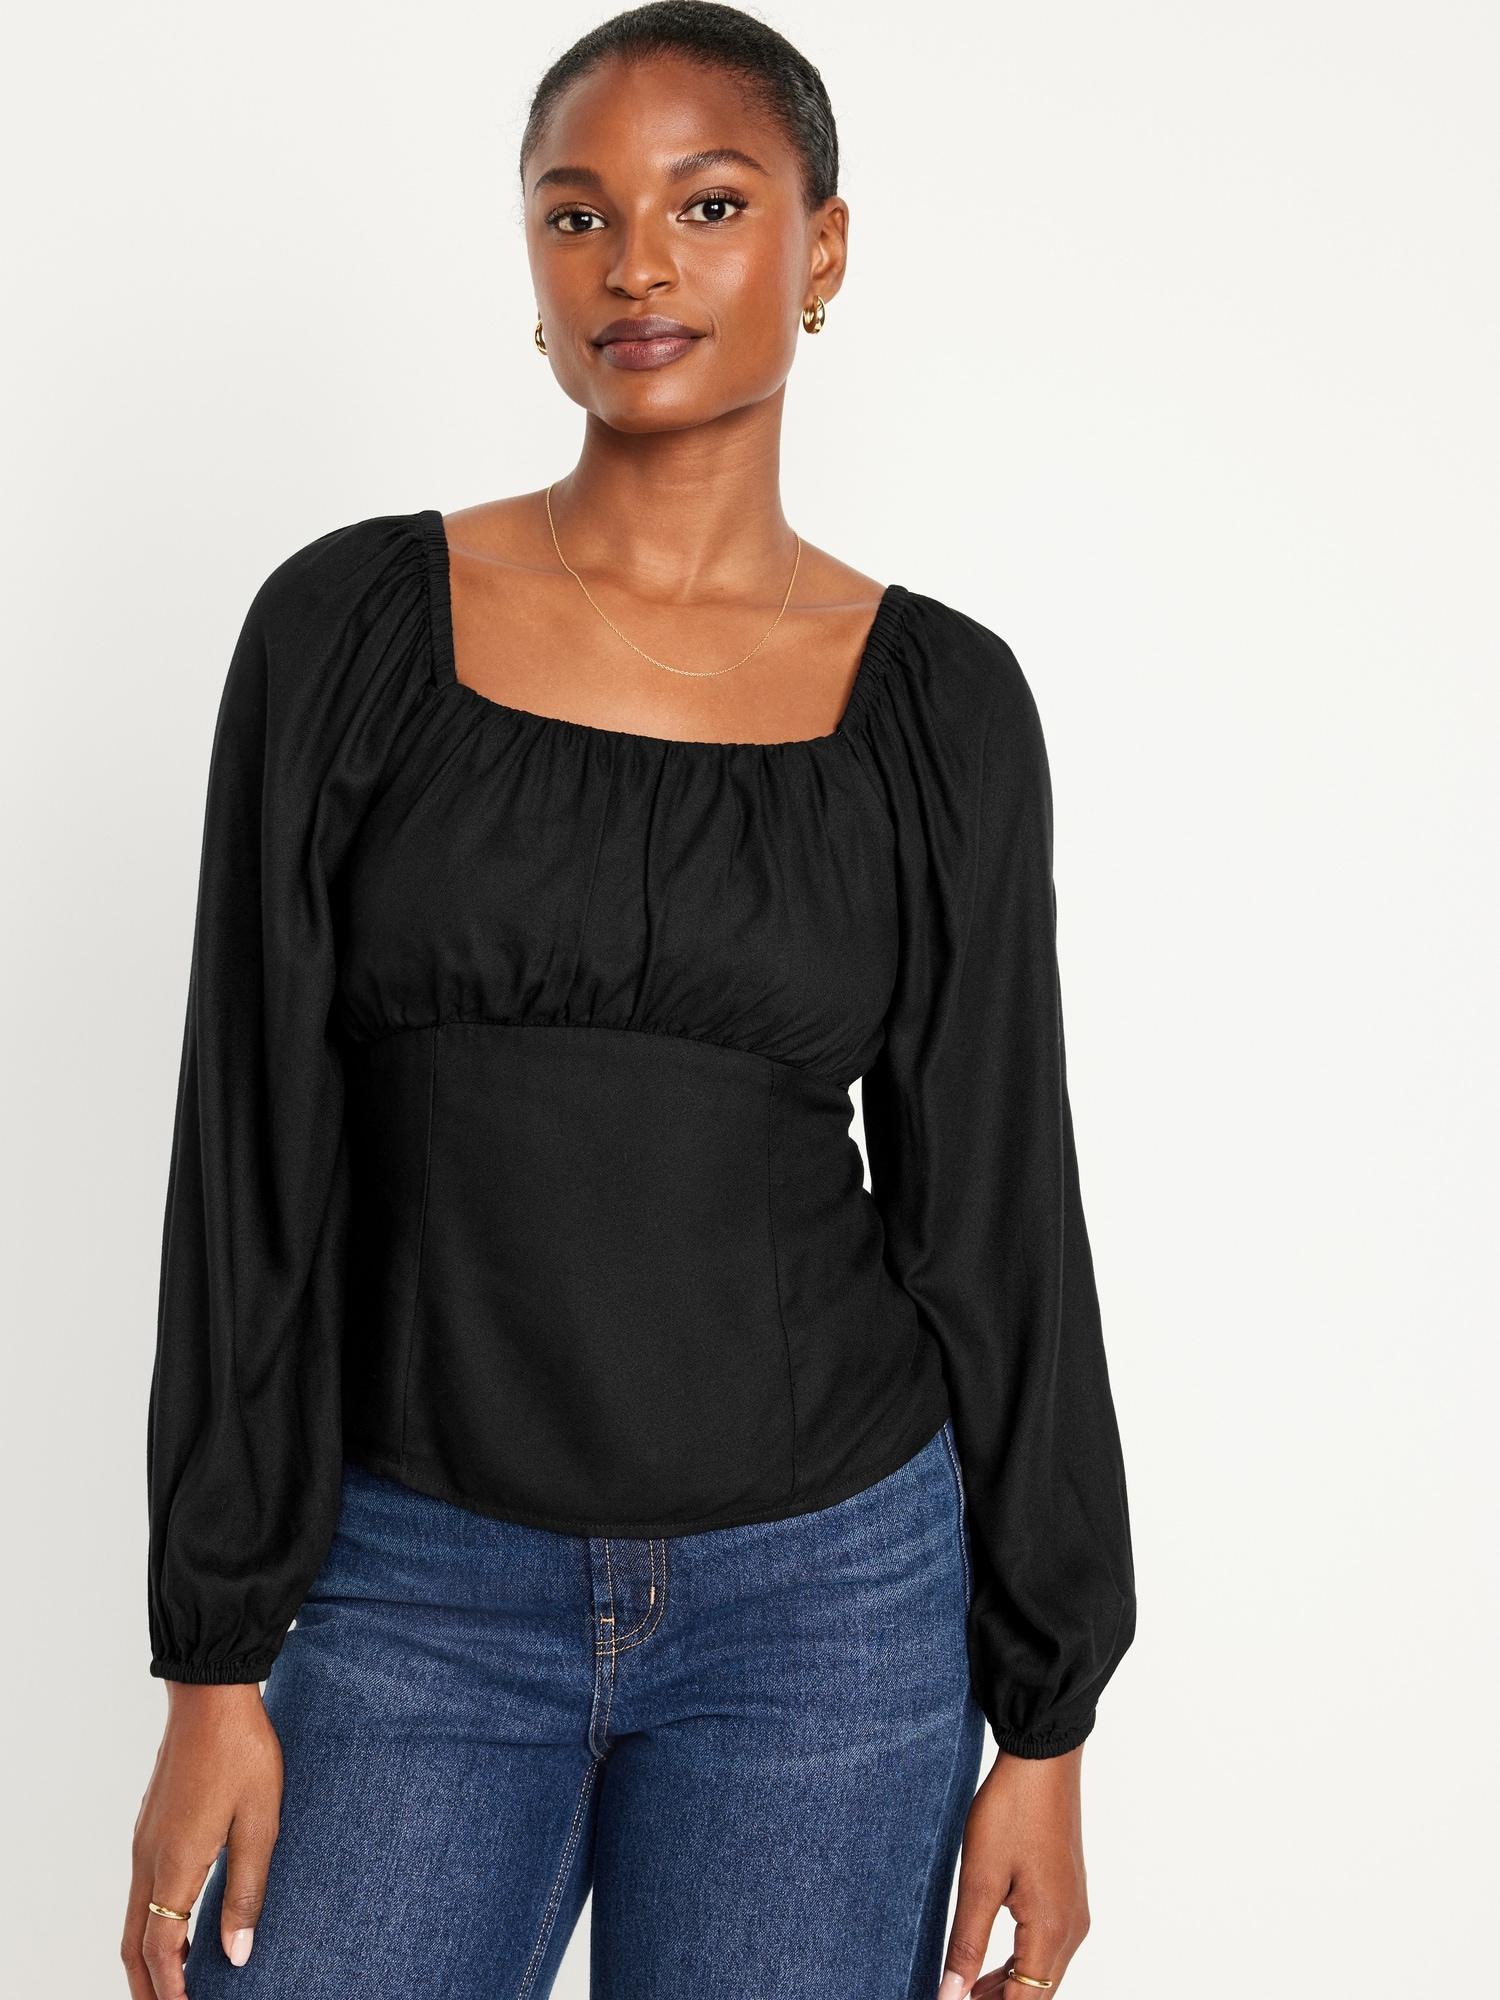 Square Neck Tops for Women